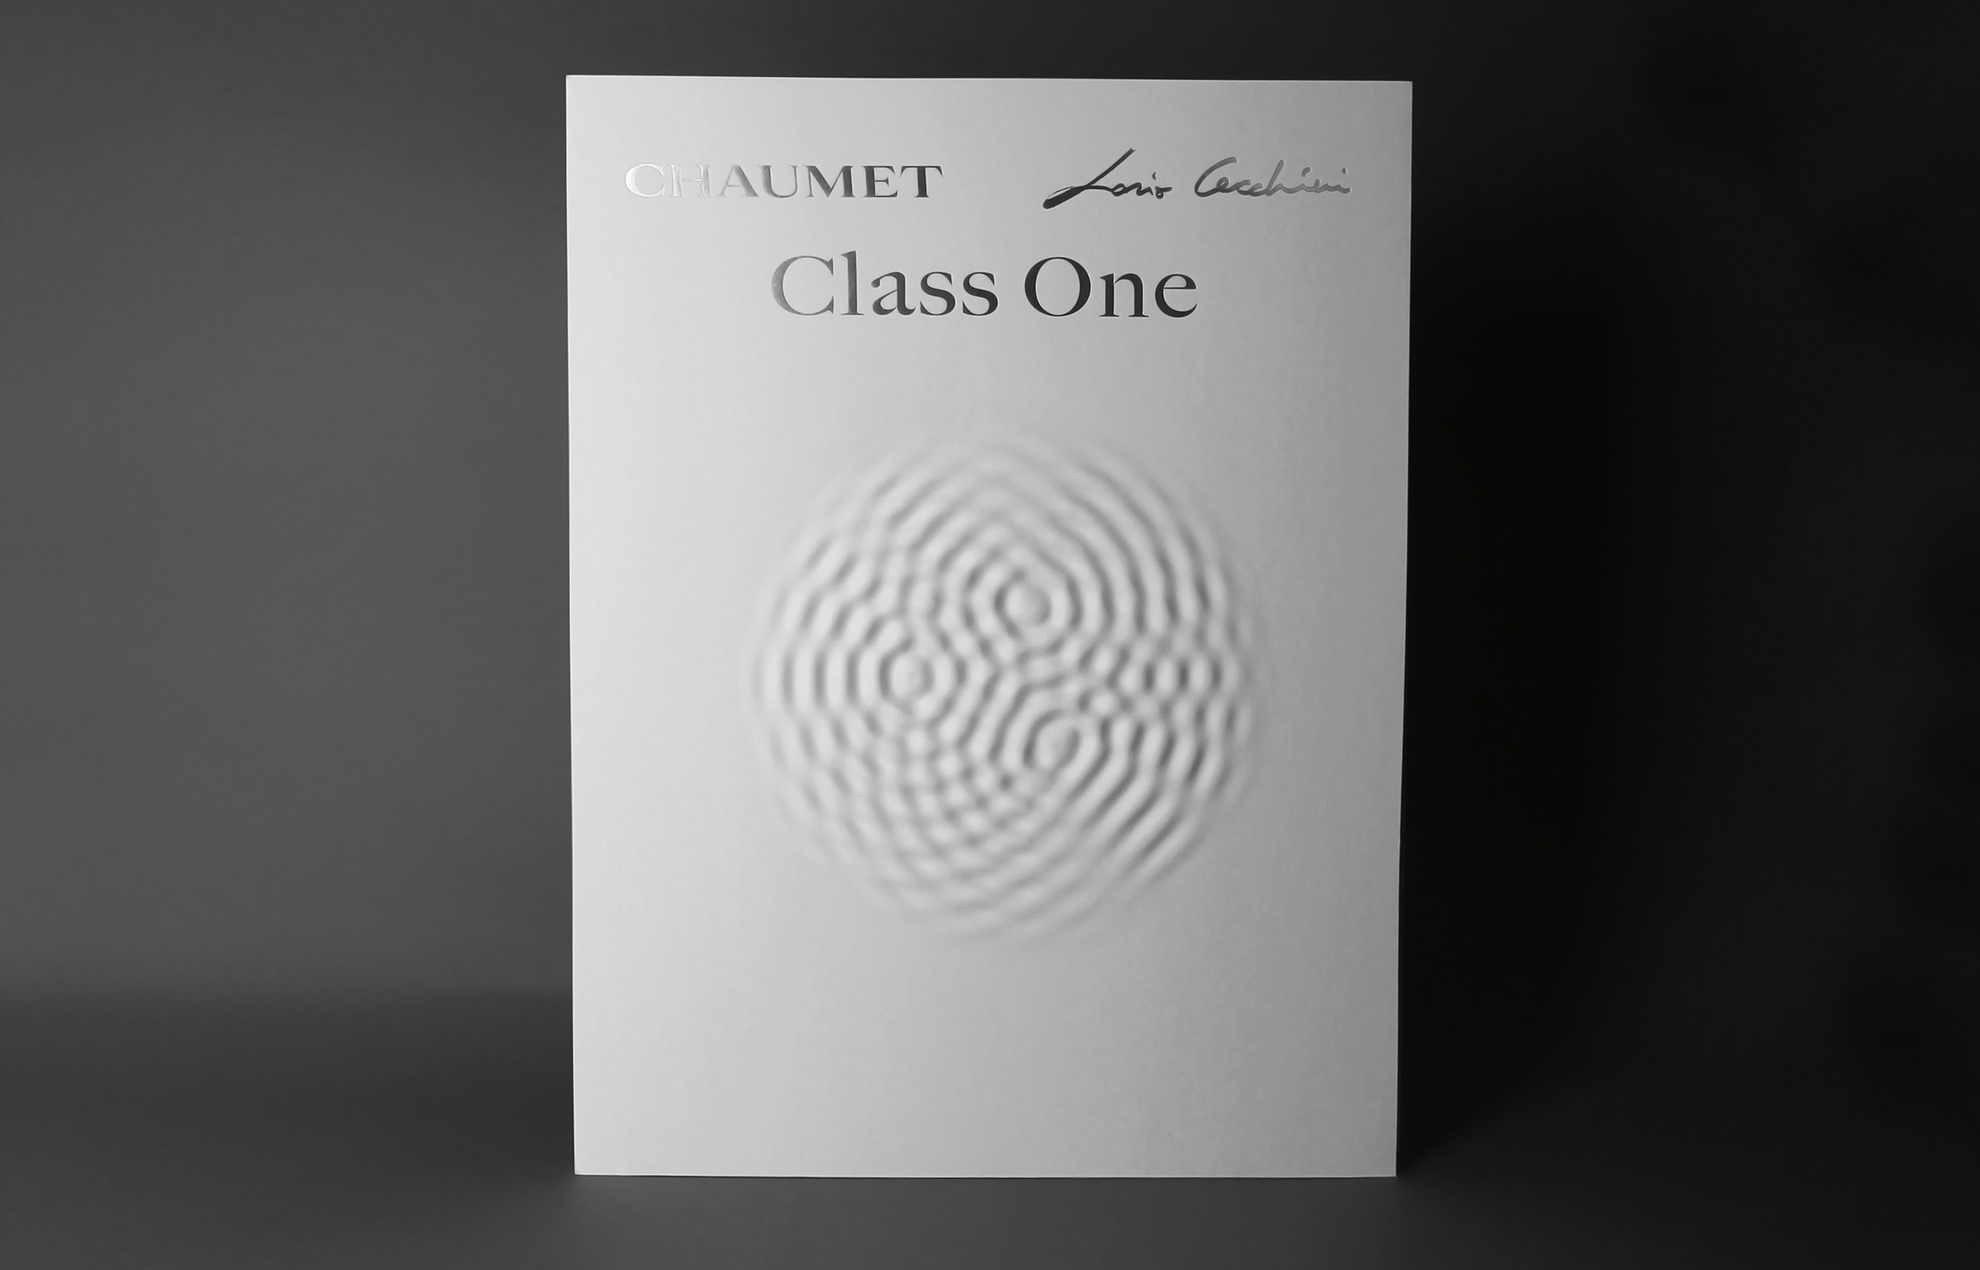 Class One - Chaumet